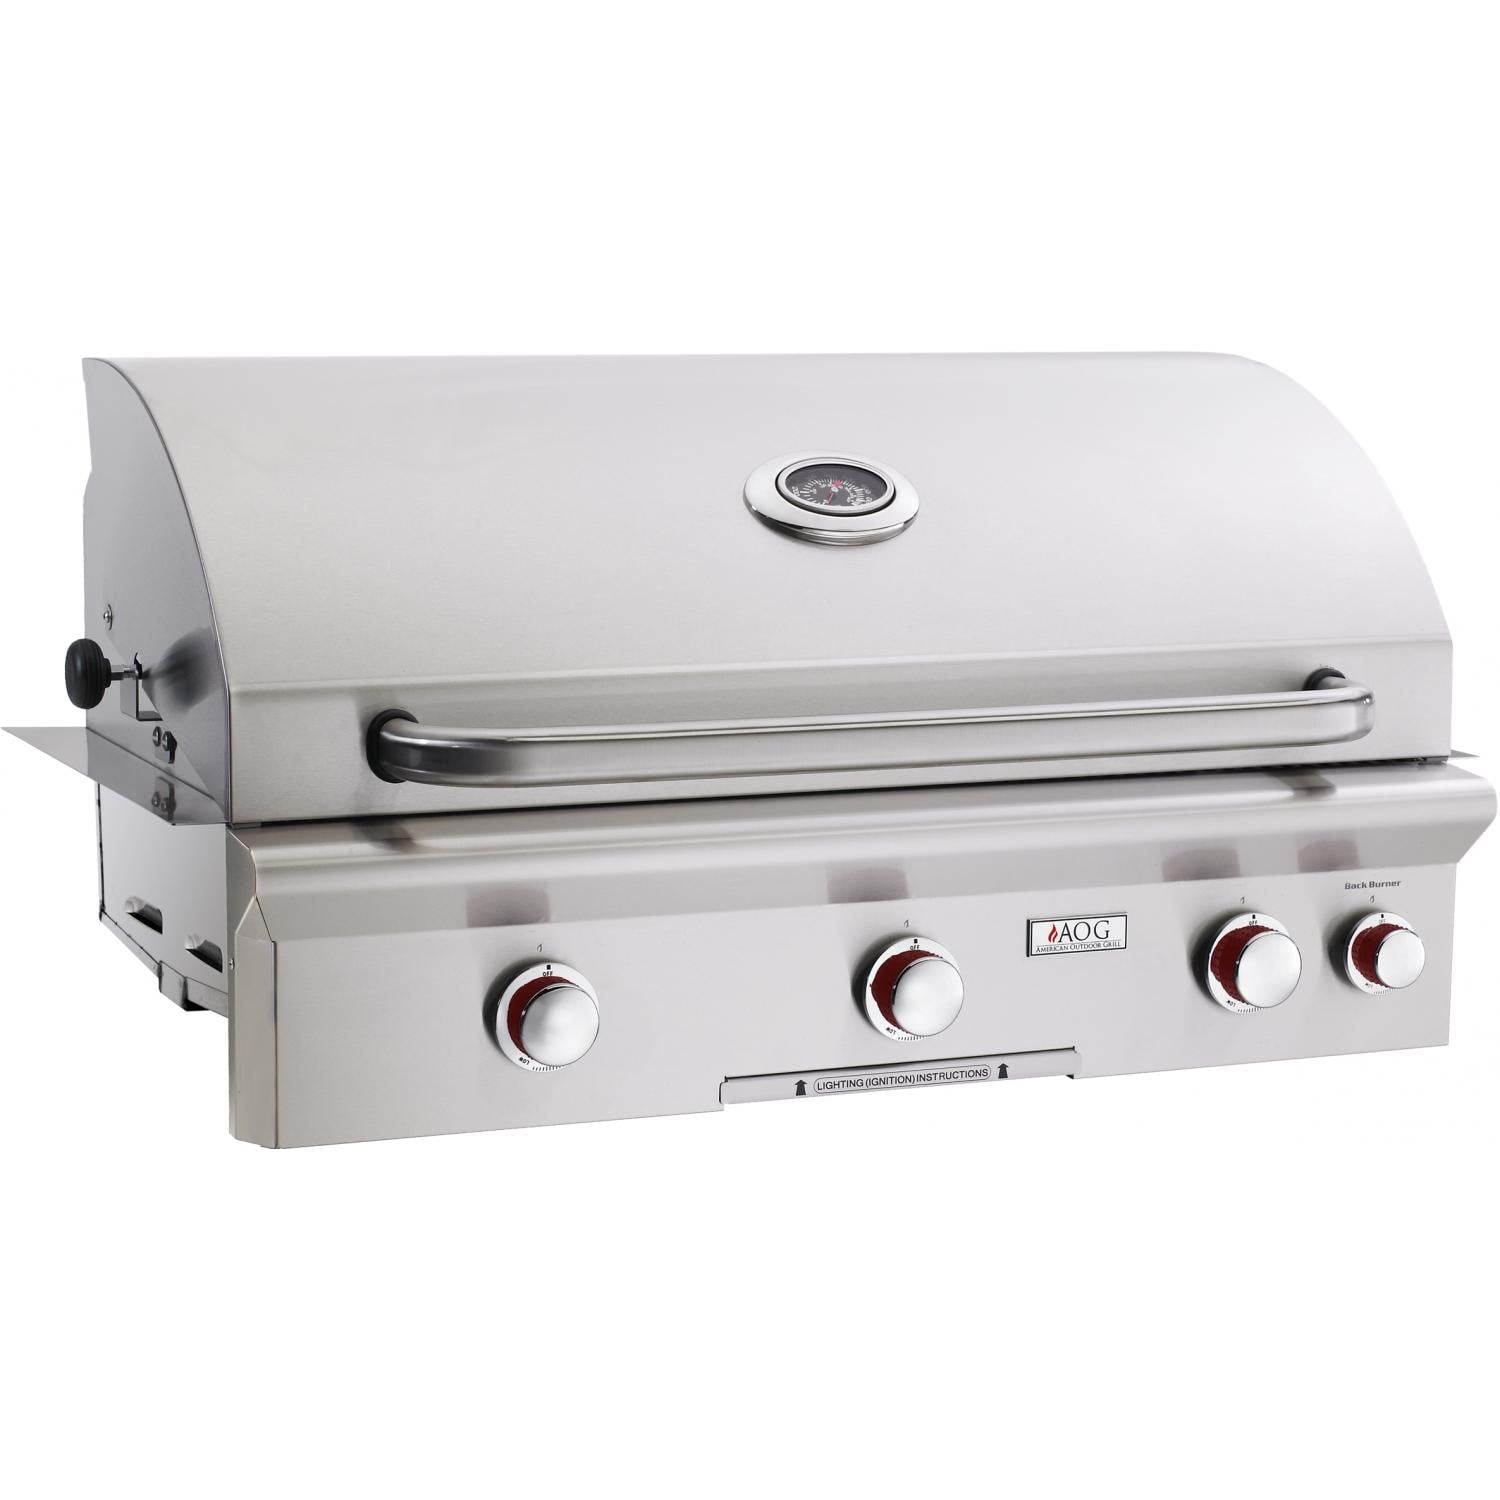 American Outdoor Grill - T-Series 36-Inch 3-Burner Built-In Propane Grill With Rotisserie | 36NBT